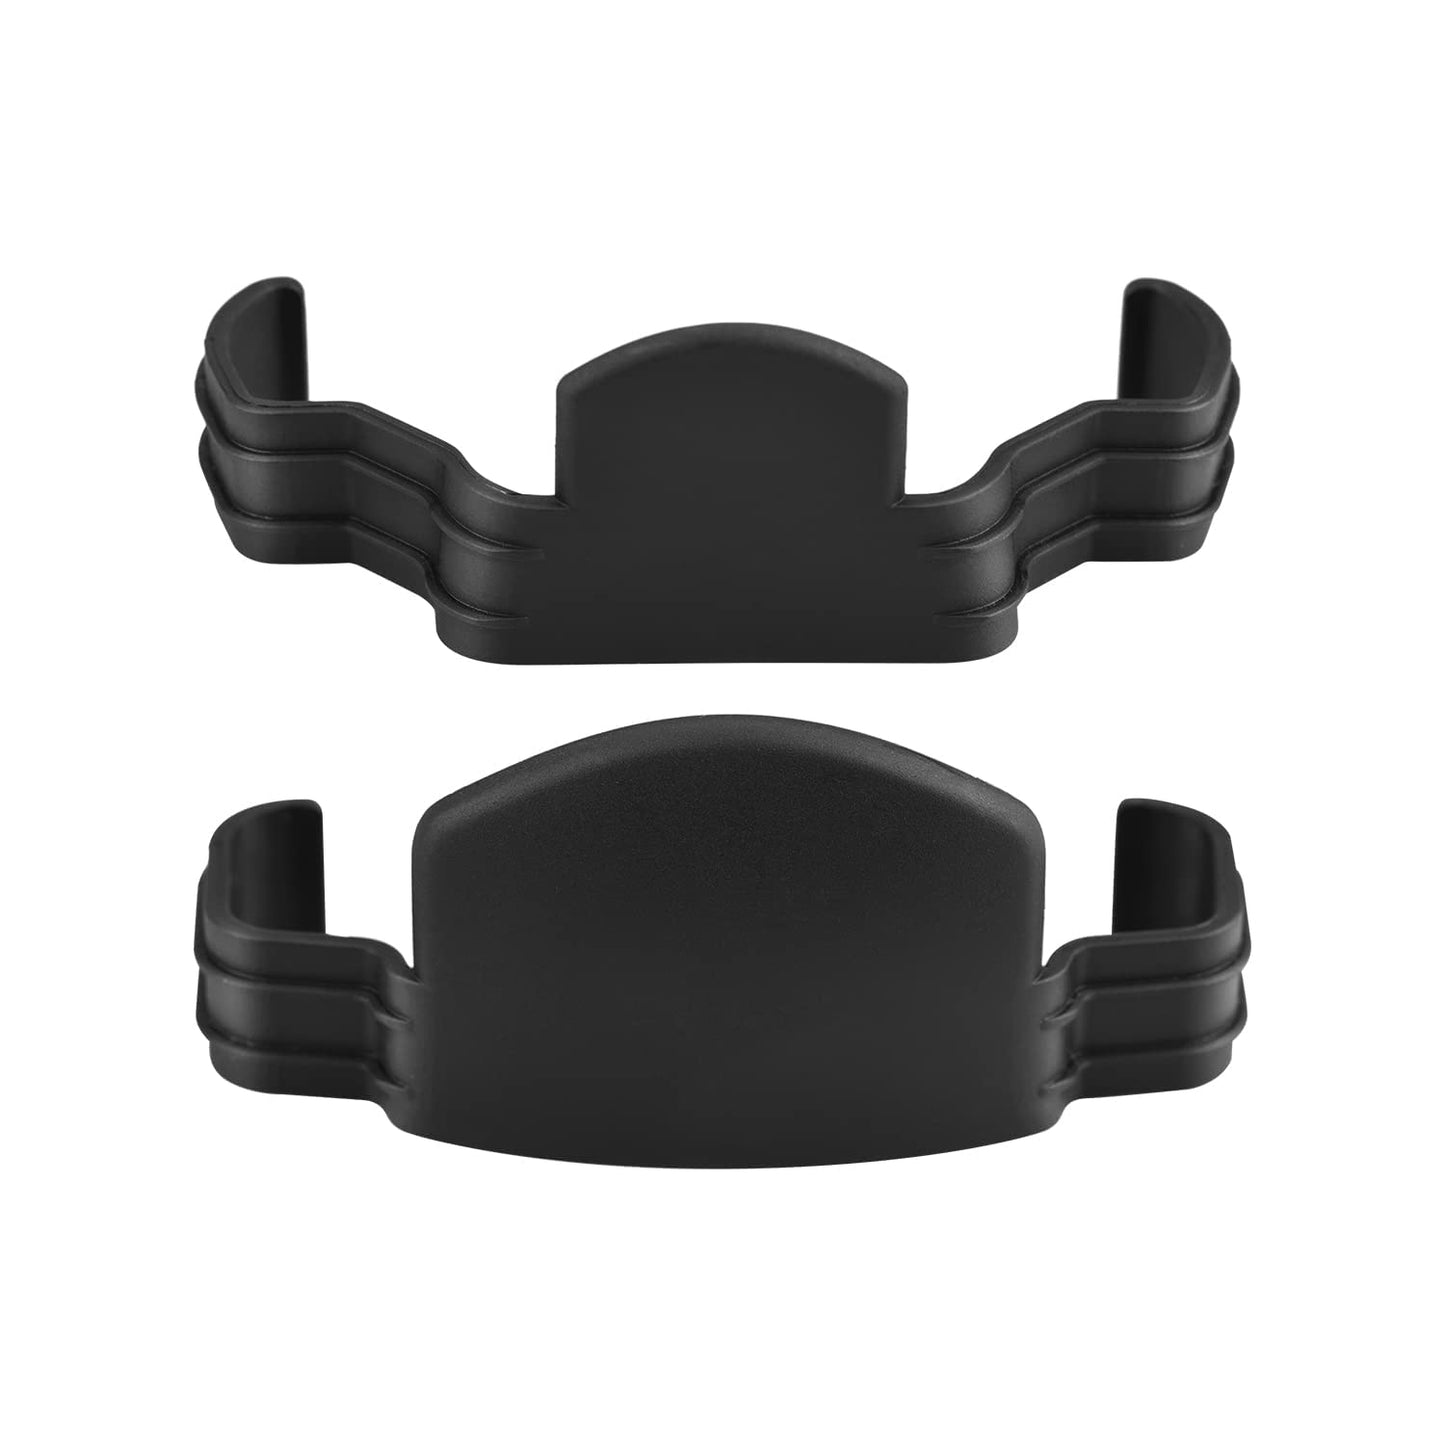 Propeller Holder Strap for DJI Mini 3 Pro Drone Wing Fixed Fixator Props Blade Stabilizer Protection Guard Accessory